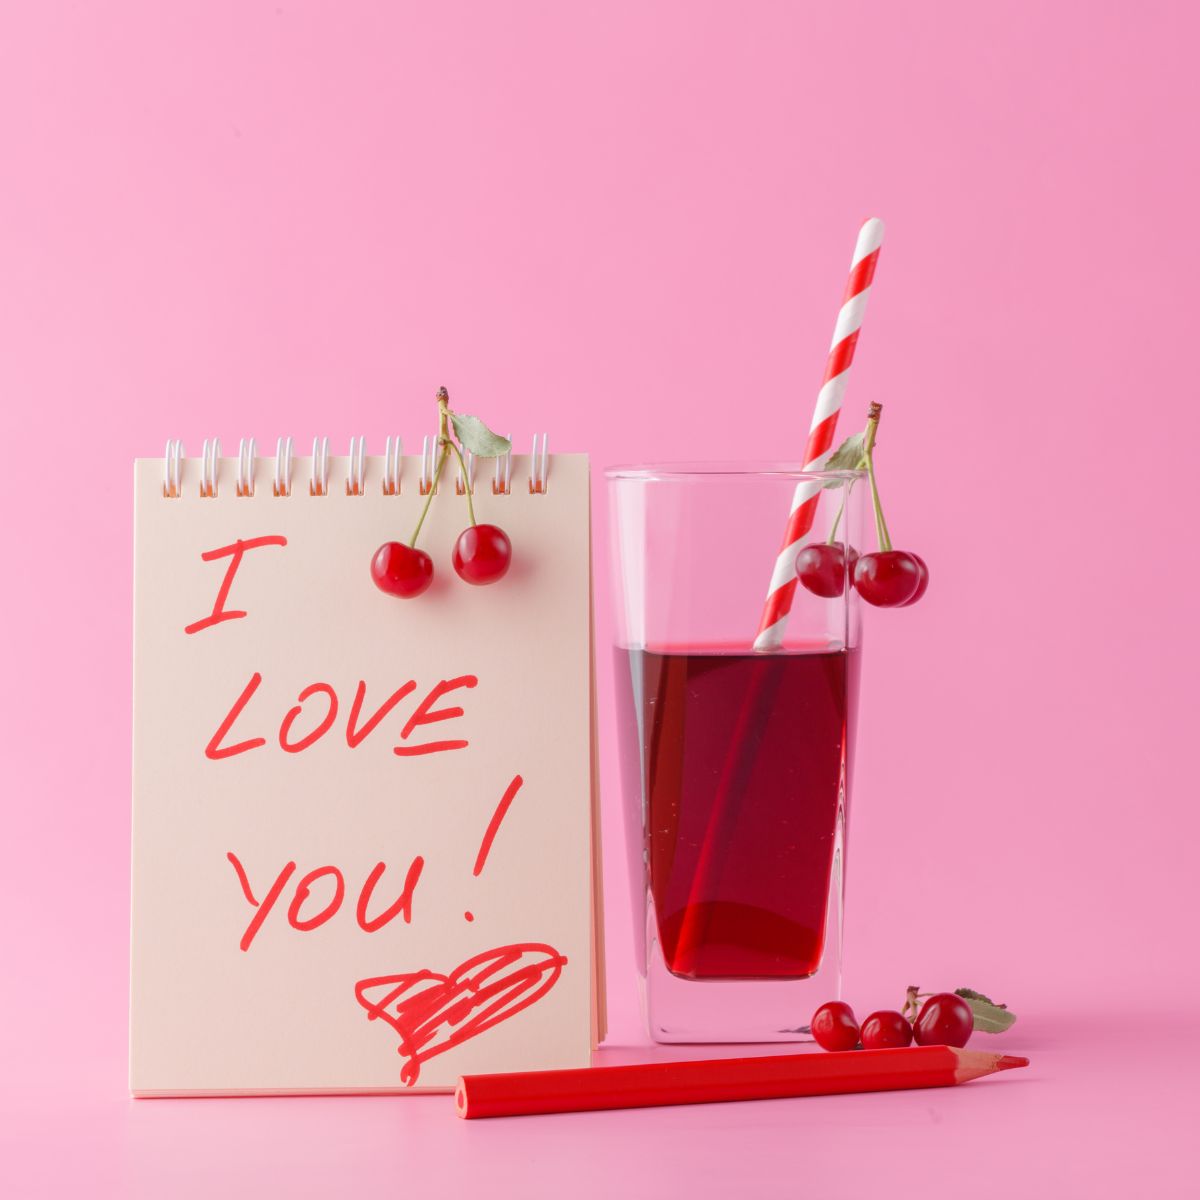 Pink background with red cherry drink with red and white straw. White notepad says I love you in red writing with a heart on it. Cherries strewn about.